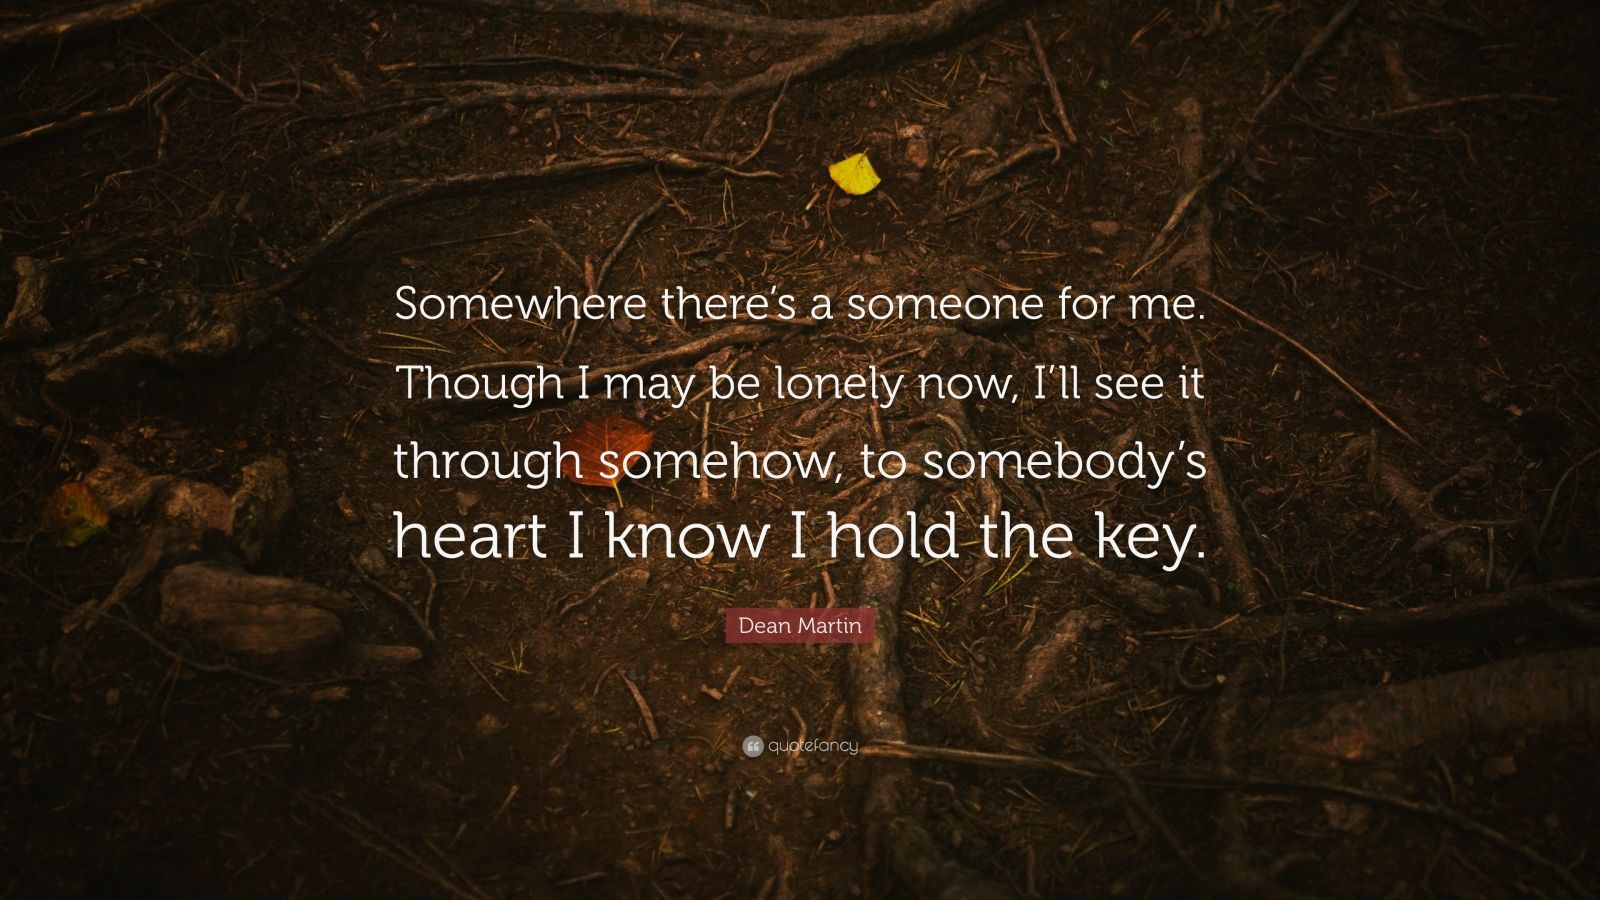 Dean Martin Quote: “Somewhere there’s a someone for me. Though I may be lonely now, I’ll see it through somehow, to somebody’s heart I know I hold the key.”